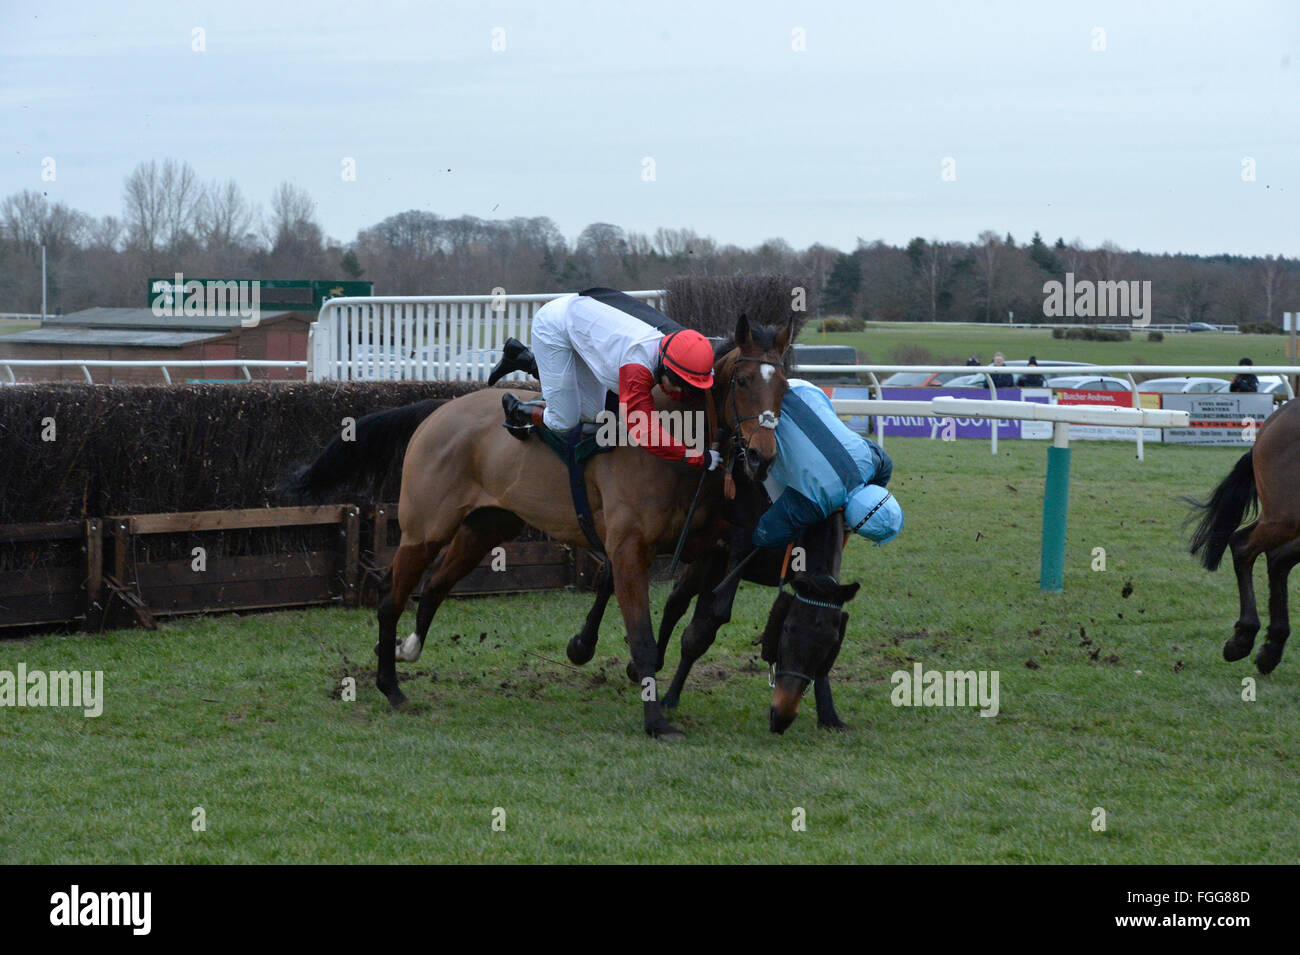 Fakenham Races 19.02.16  Victoria Pendleton falls from her horse Pacha Du Polder after clashing with Baltic Blue ridden by Carey Williamson during the 4.15 race at Fakenham. Stock Photo